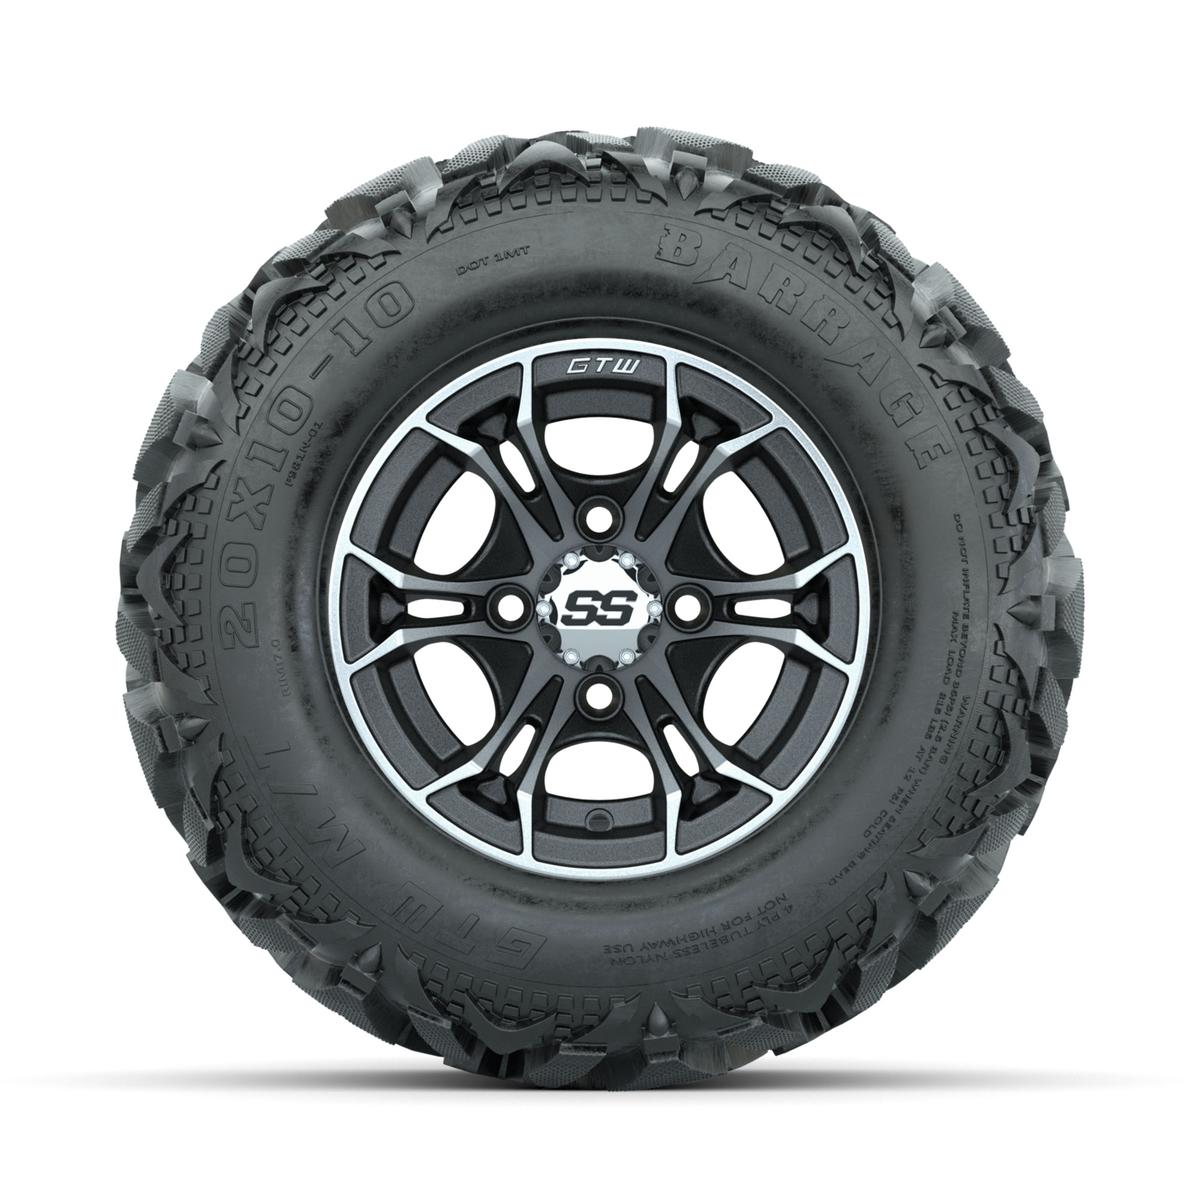 GTW Spyder Machined/Matte Grey 10 in Wheels with 20x10-10 Barrage Mud Tires – Full Set